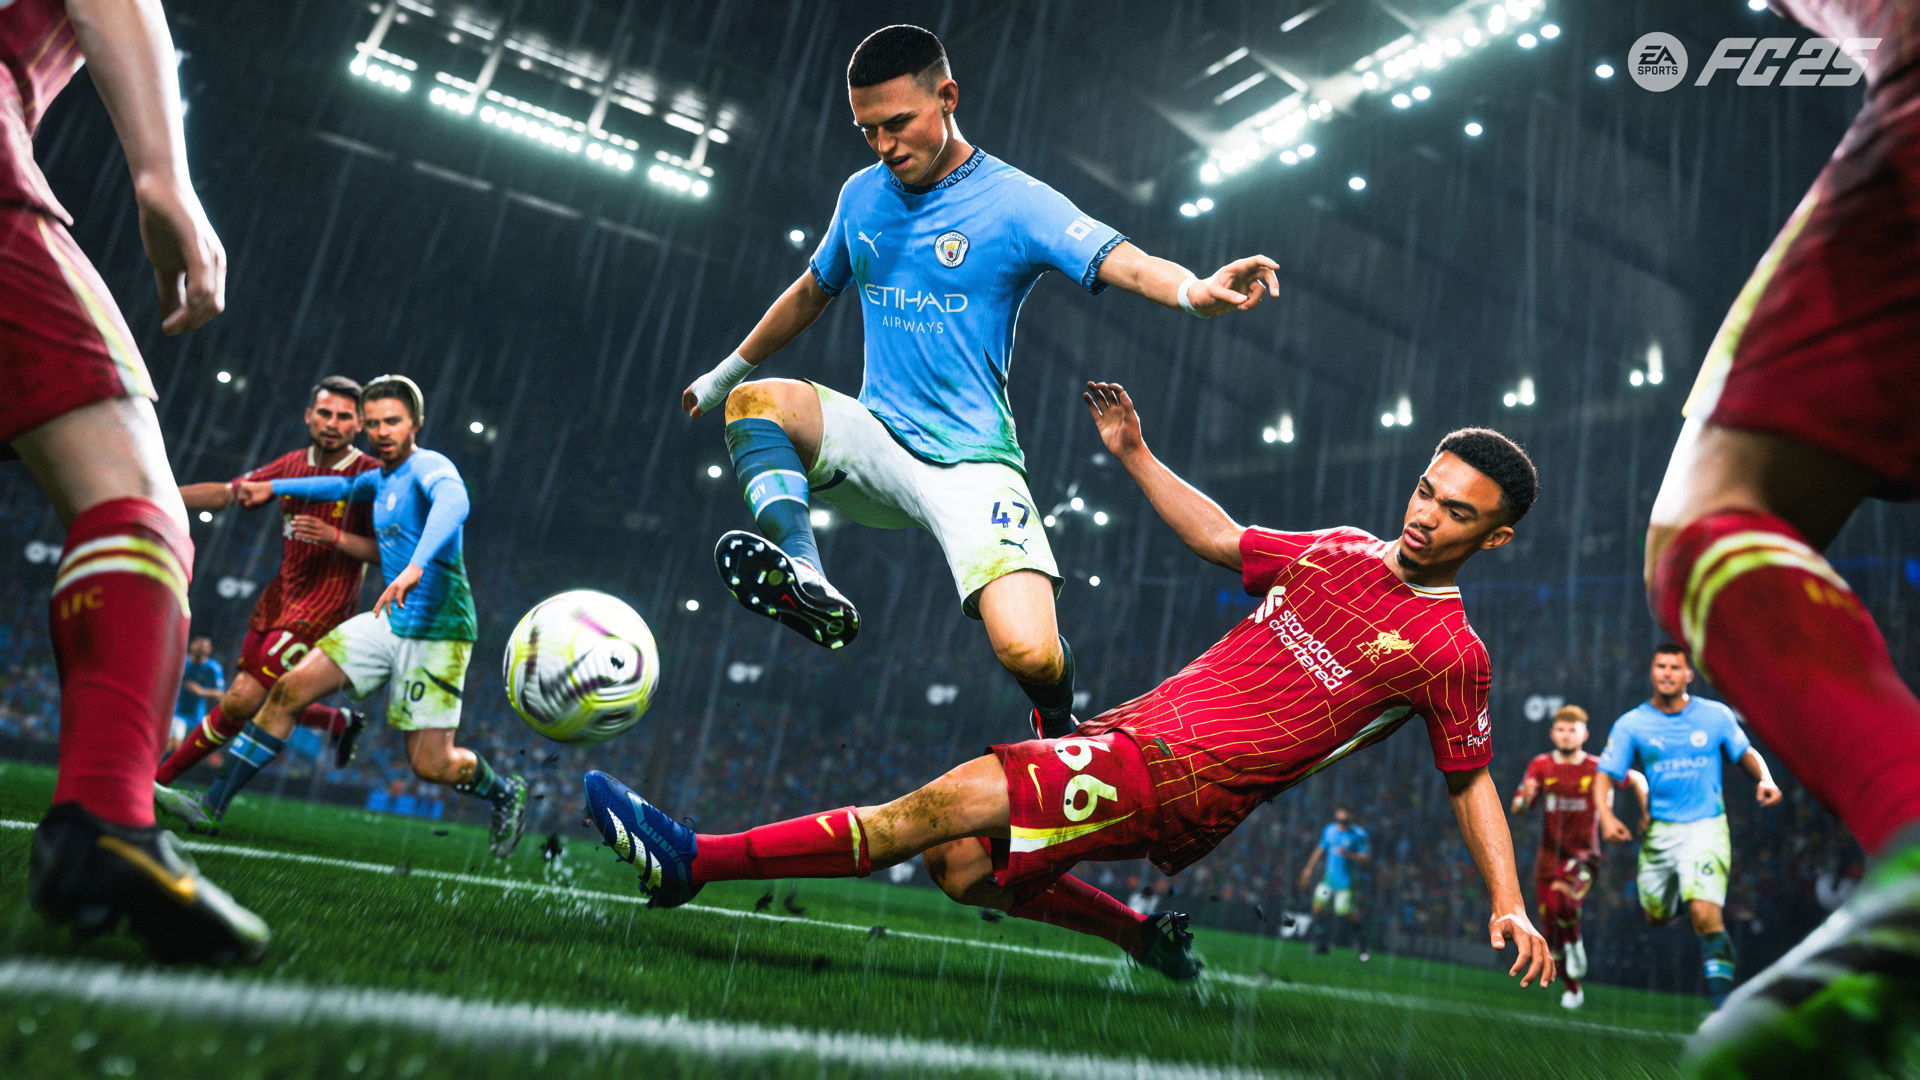 A soccer player leaps over a sliding tackle to the ball, with the goalie in the foreground, in a scene captured from EA Sports FC 25